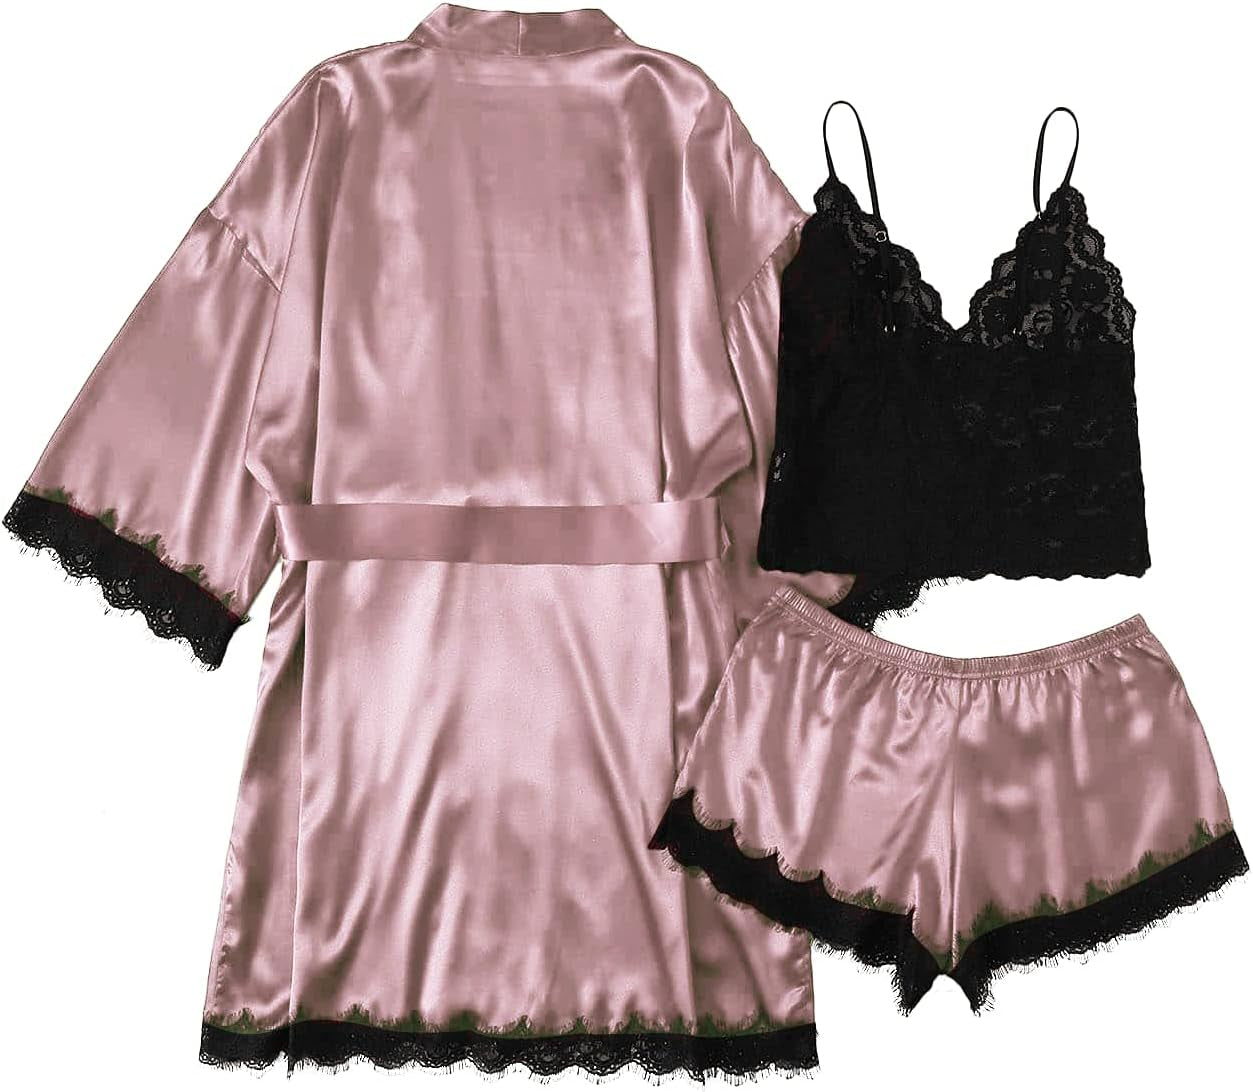 "Glamorous Satin Silk Lace Lingerie Set: Cami Top, Shorts, and Robe - Ideal Sleepwear for Women"